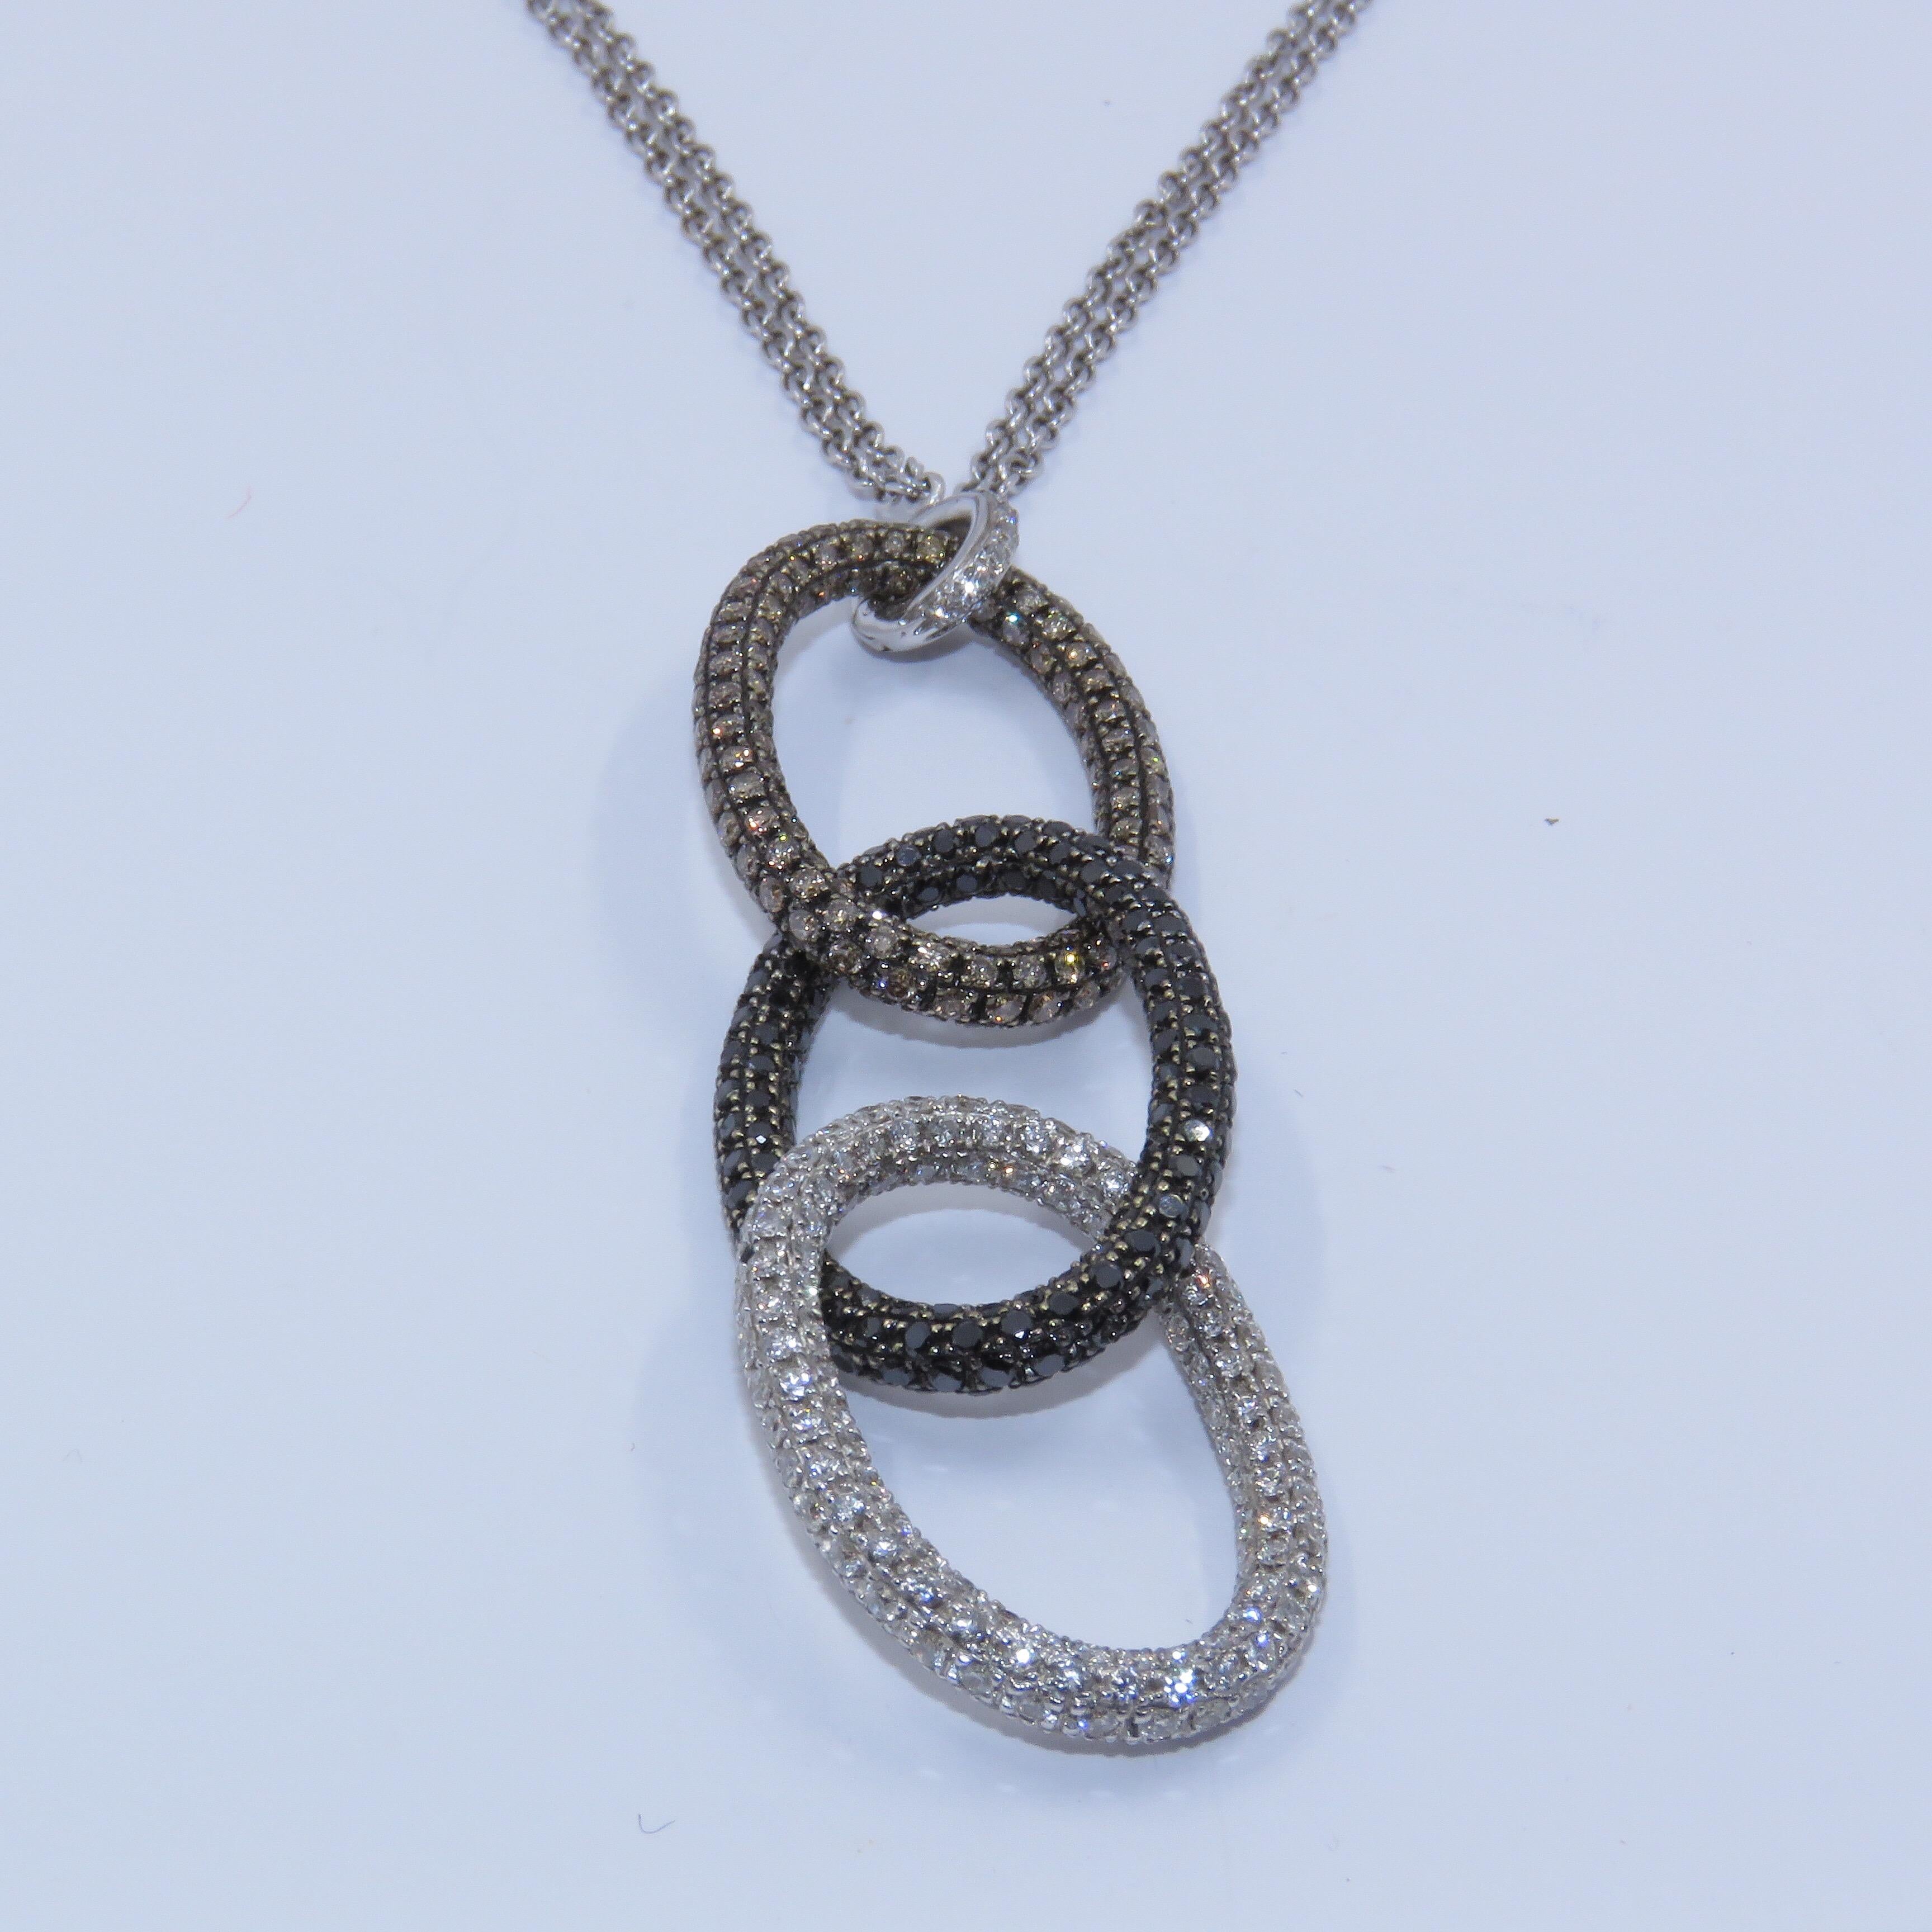 White, Black and Brown diamond necklace, set in 18Kt White Gold 
Diamond weight 2.43 carats
18 Kt White Gold double chain is detachable with a diamond hook, versatile to take a different enhancer or pendant.